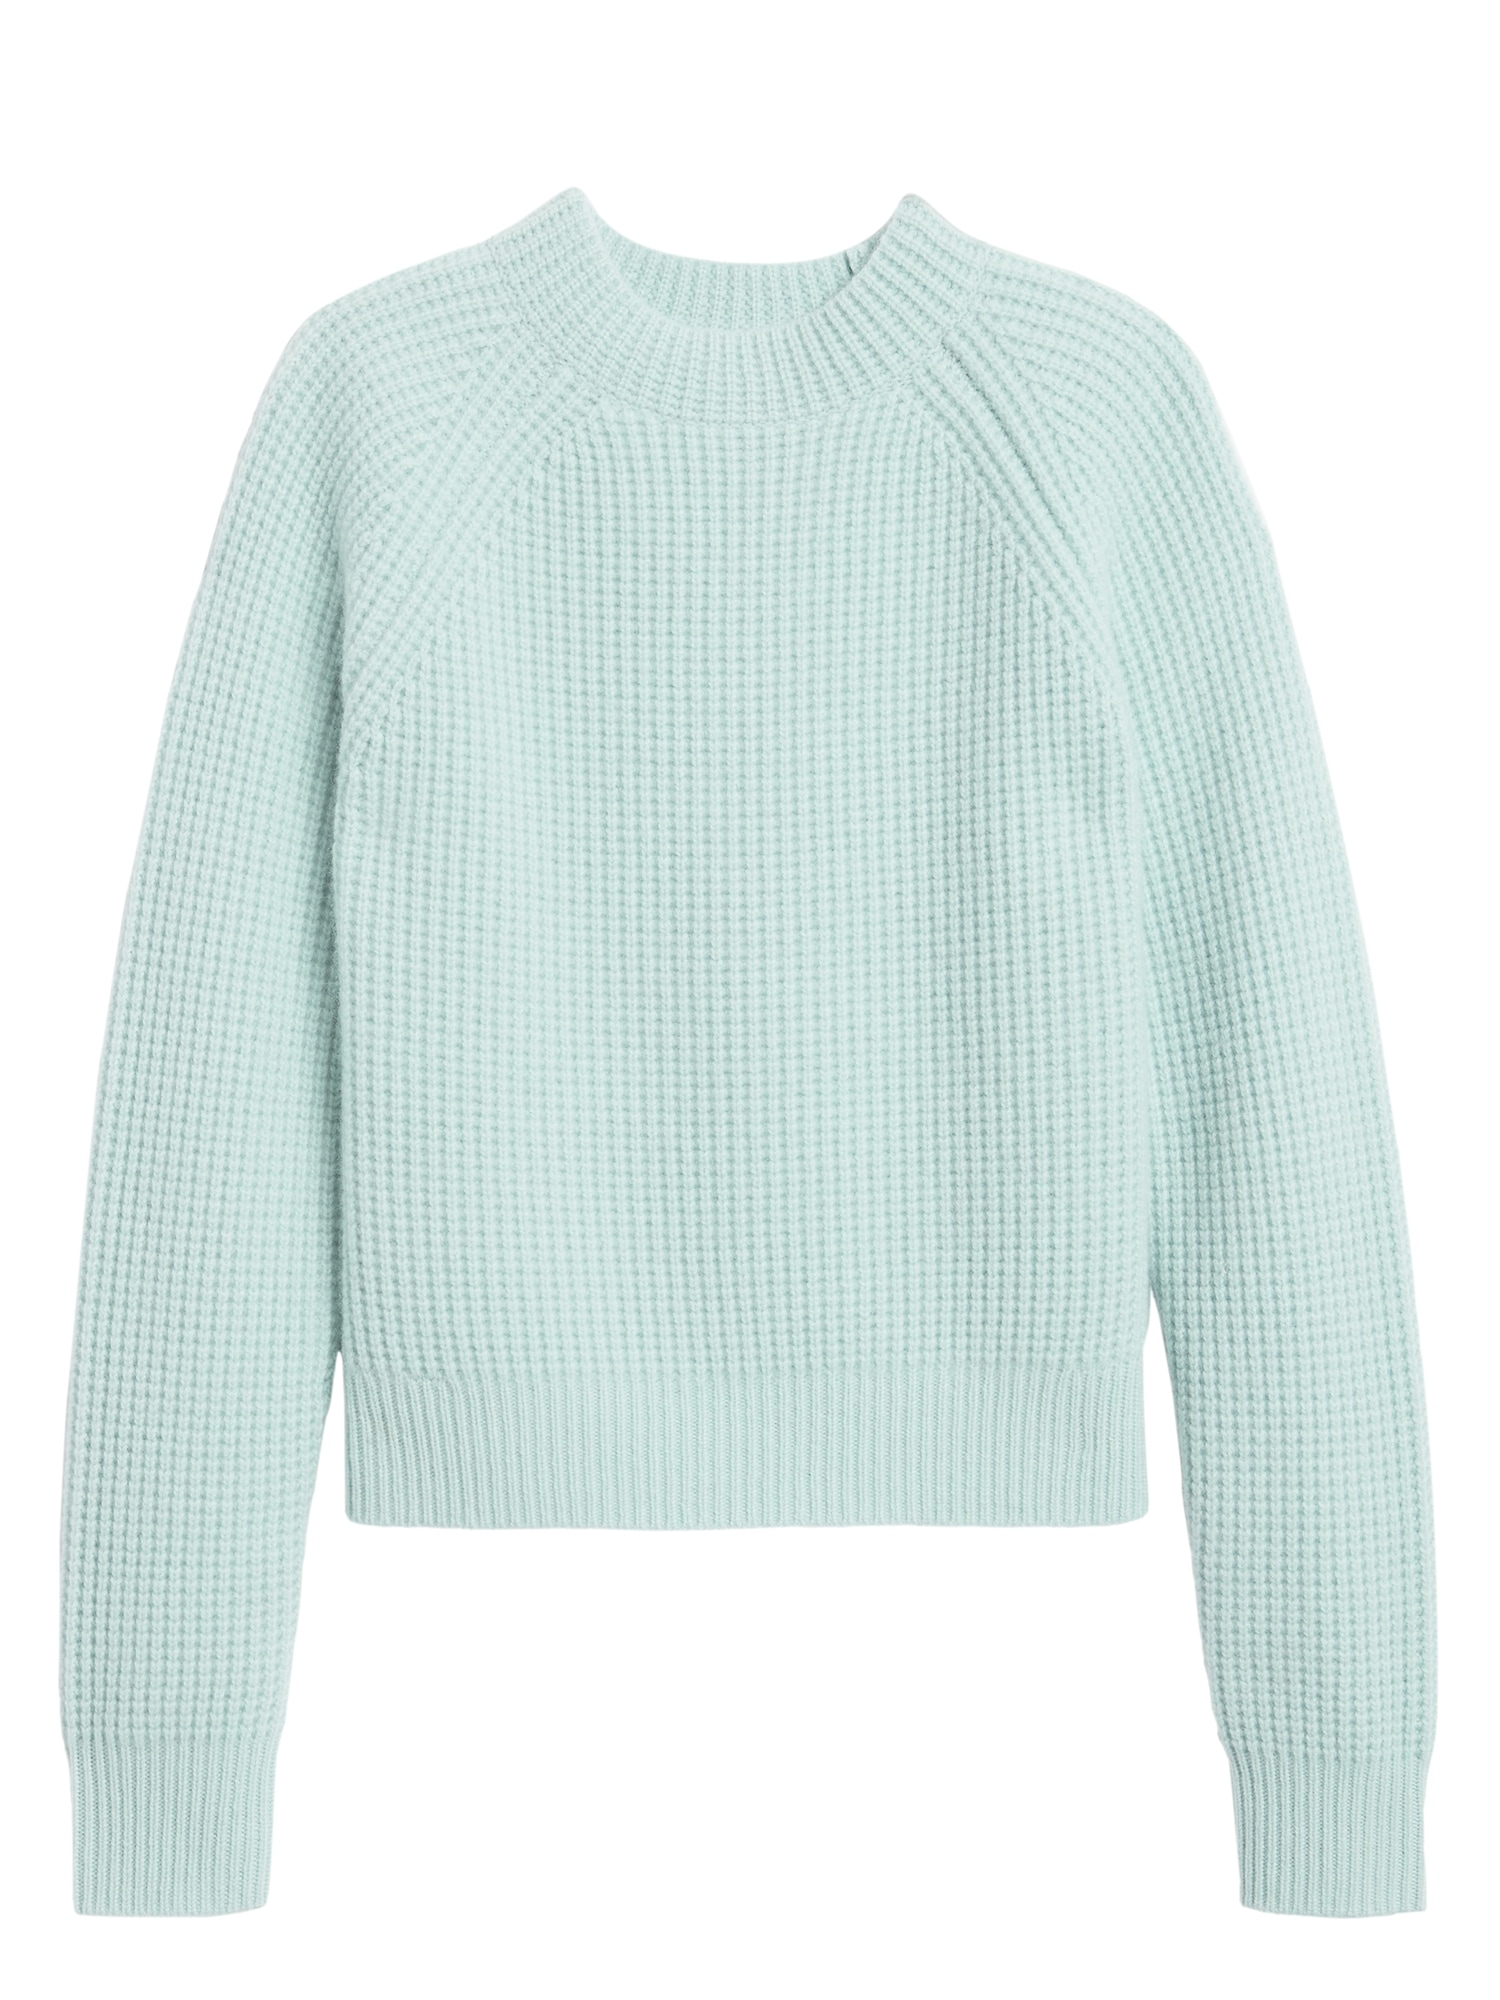 Cashmere Cropped Mock-Neck Sweater